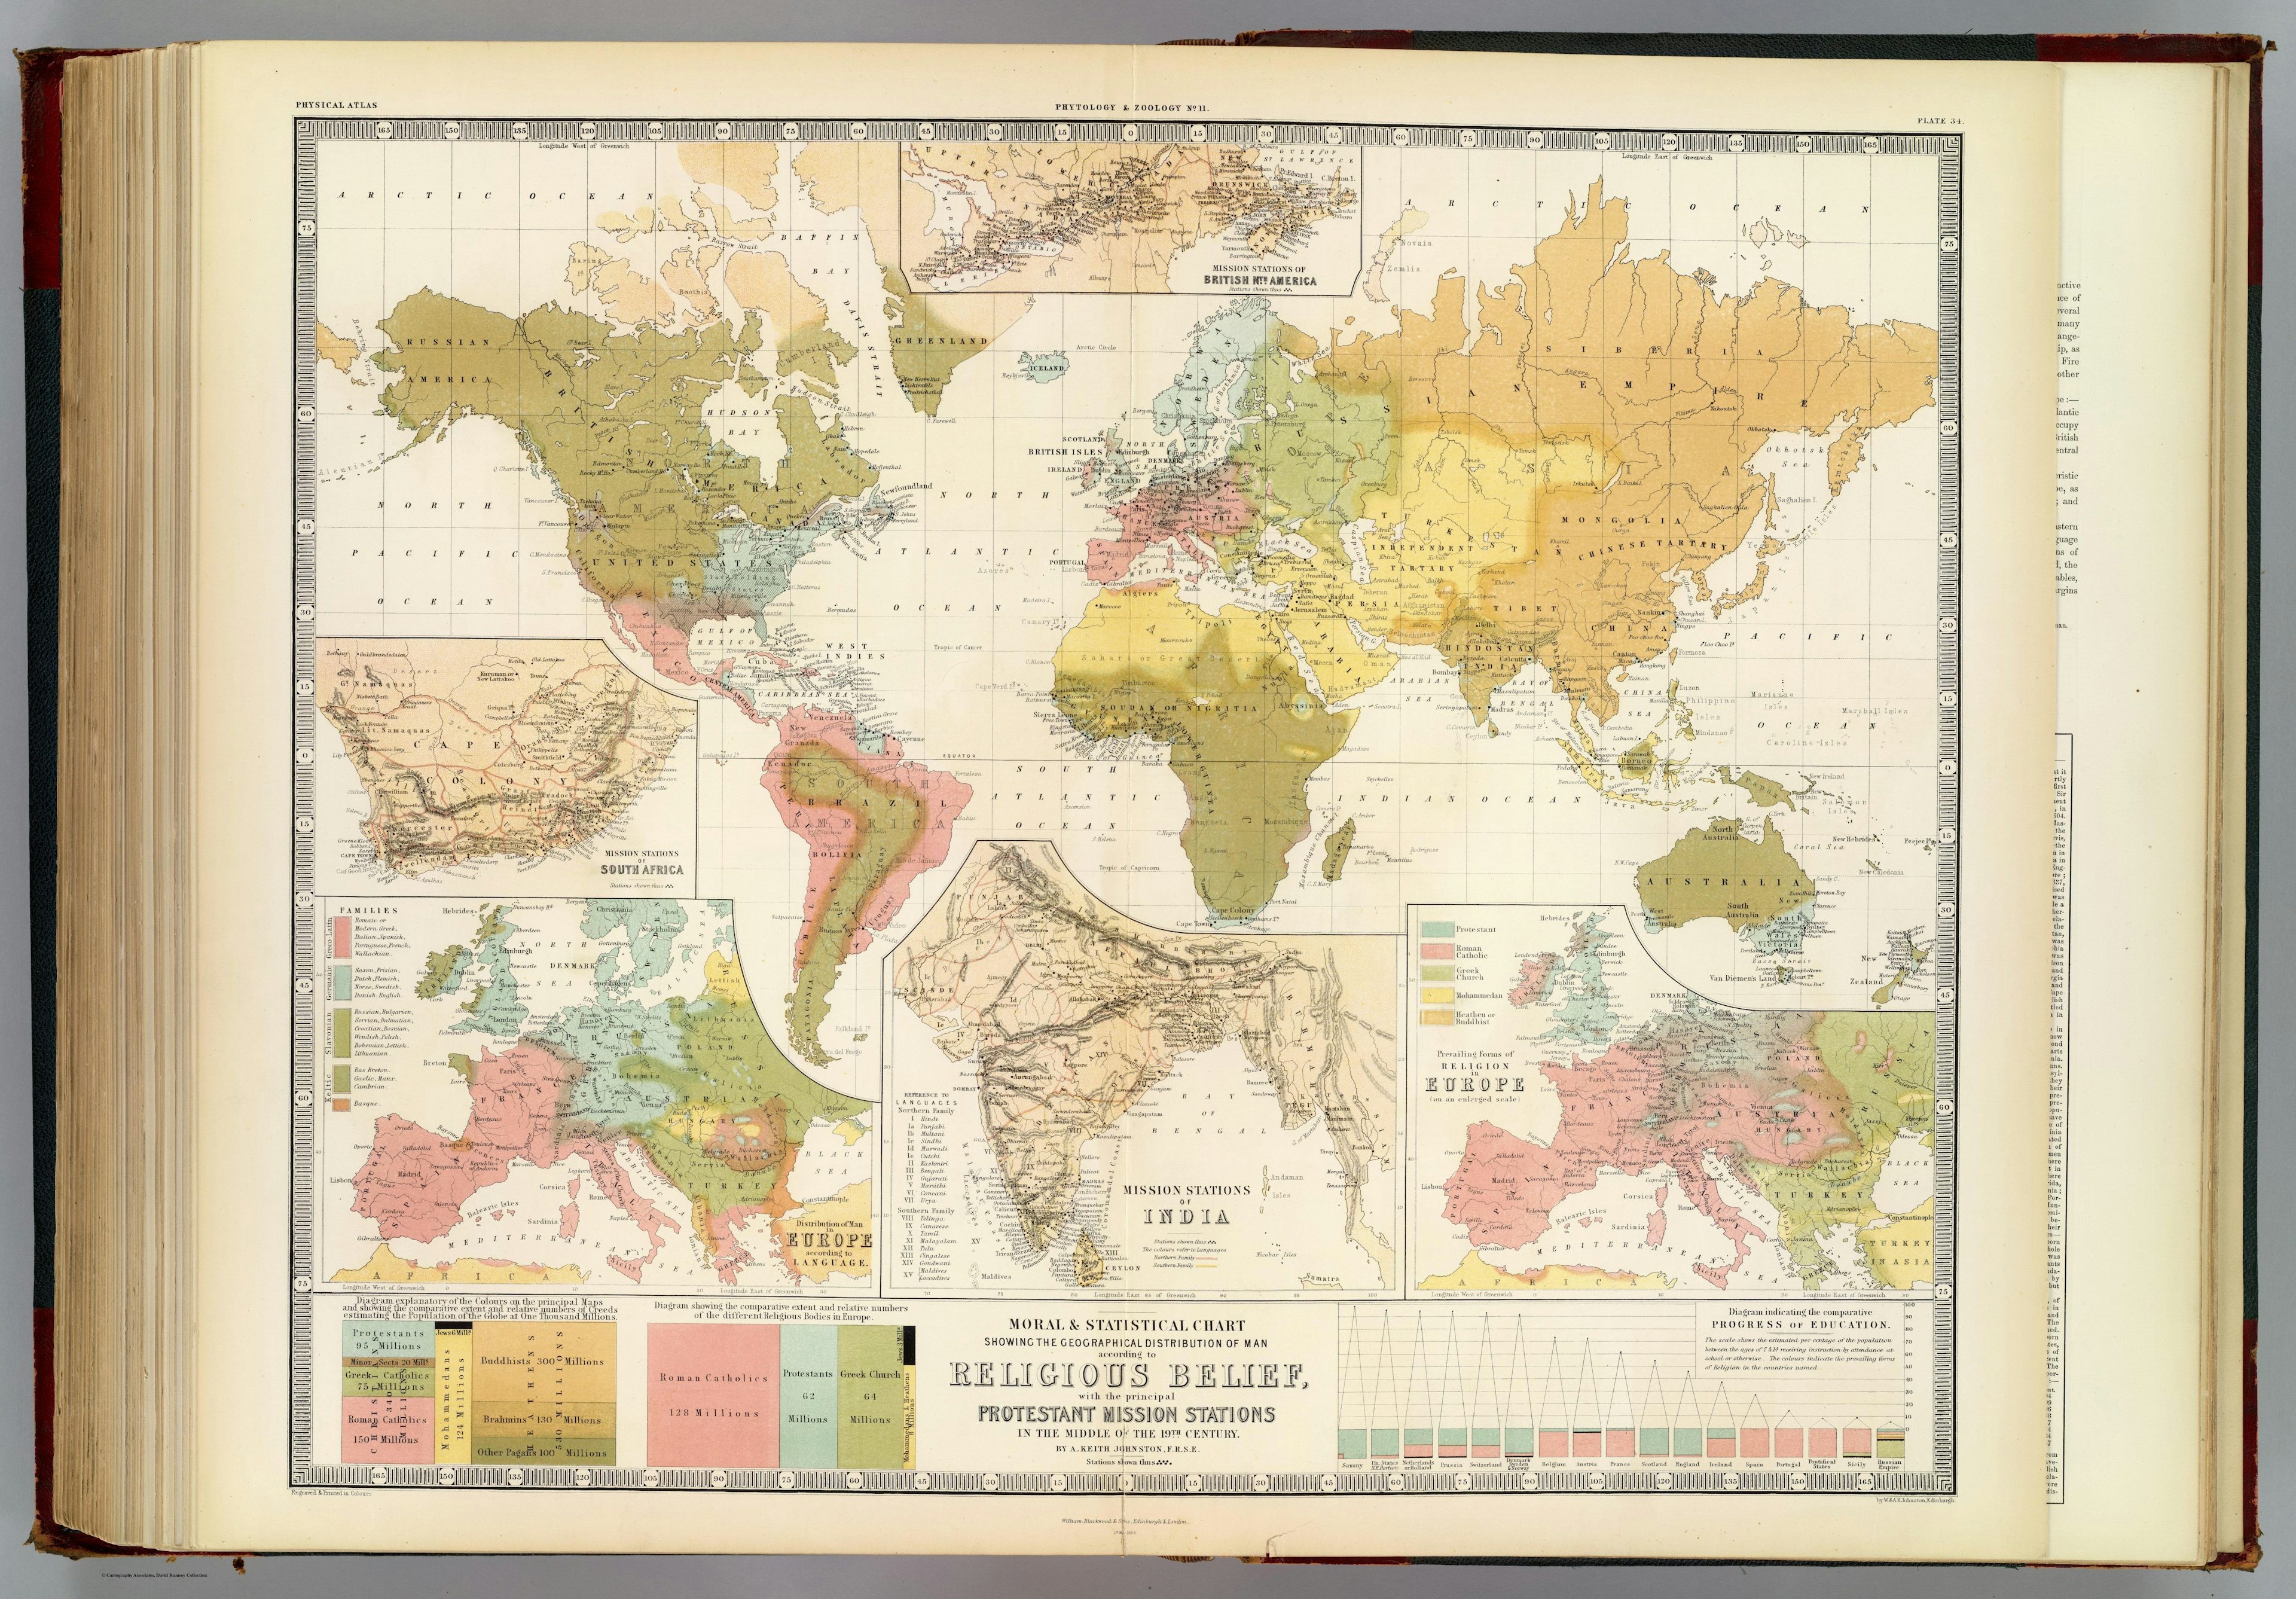 World map of religious beliefs developed by a Scottish cartographer in the 19th century. “Moral and Statistical Chart Showing the Geographical Distribution of Man According to Religious Belief, With the Principal Protestant Mission Stations in the Middle of the 19th Century.” By A. Keith Johnston, F.R.S.E. David Rumsey Map Collection